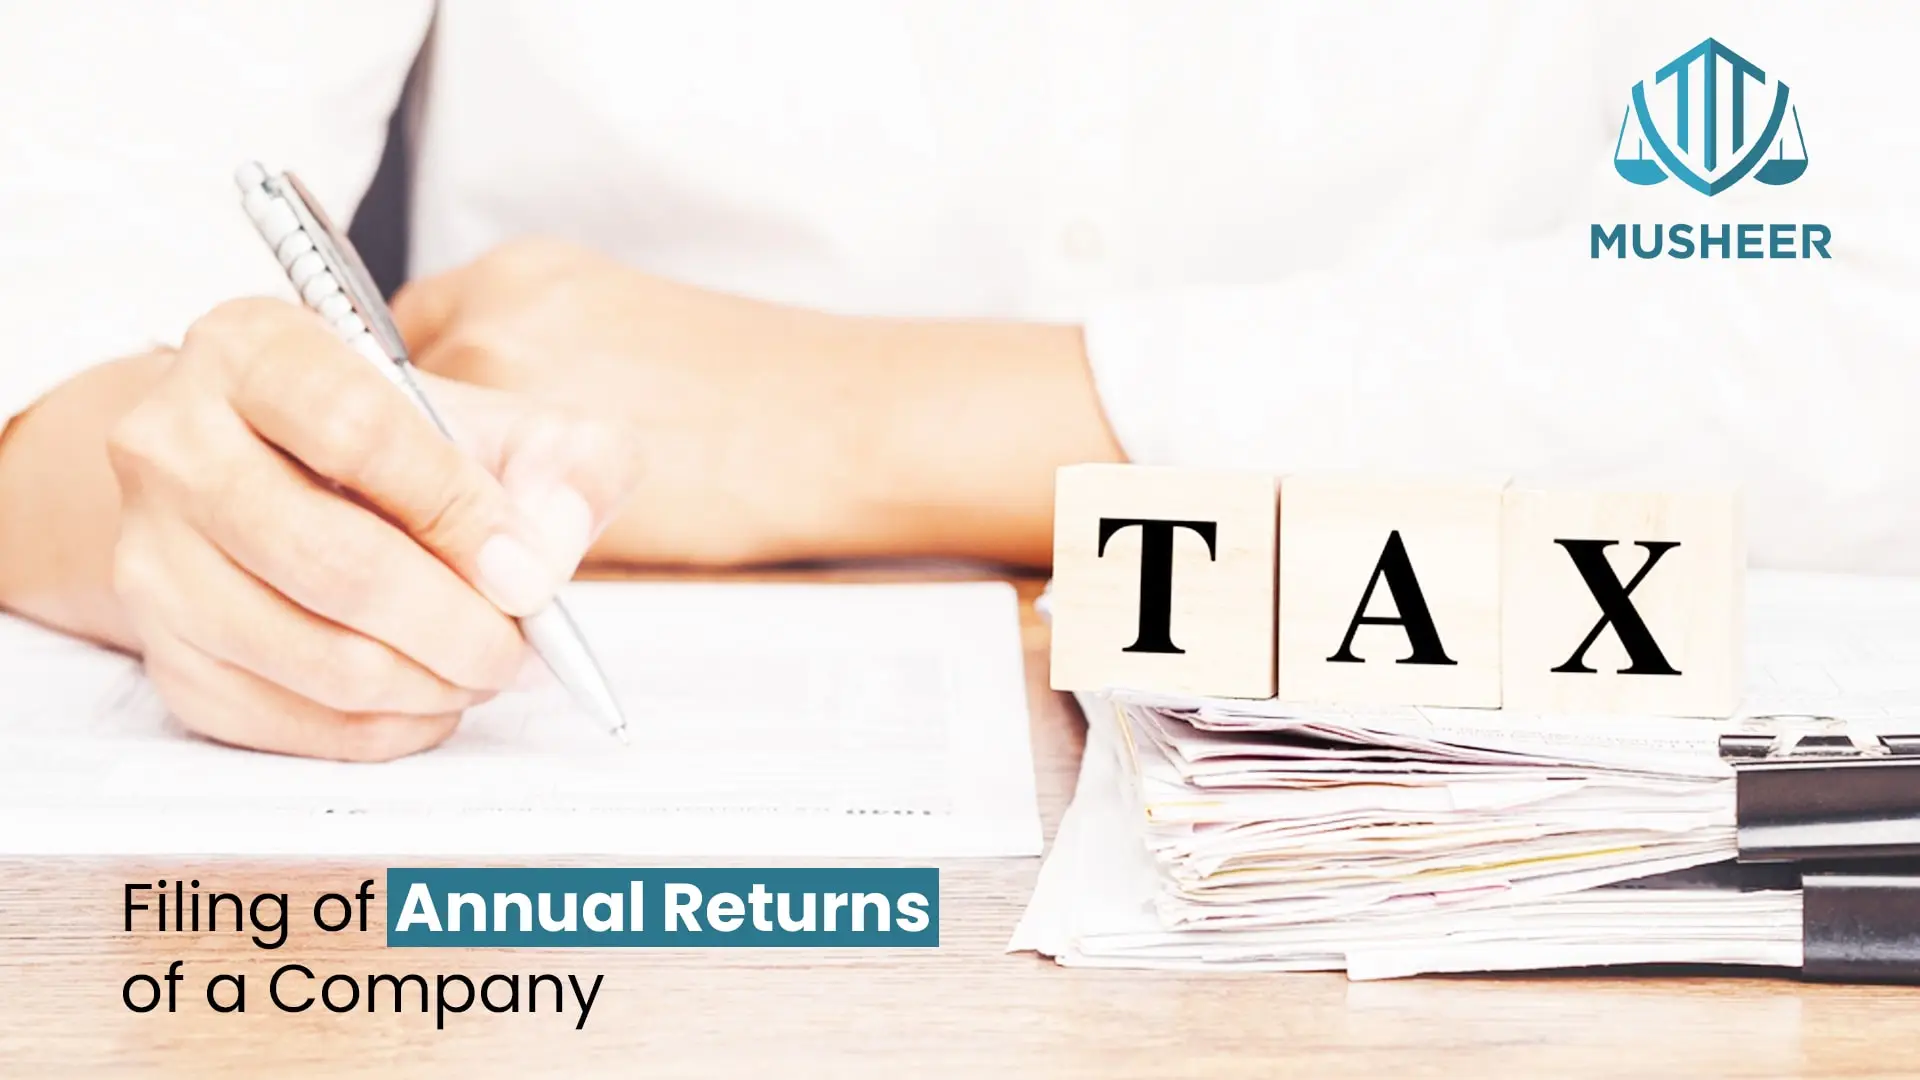 How to file an annual return of a company